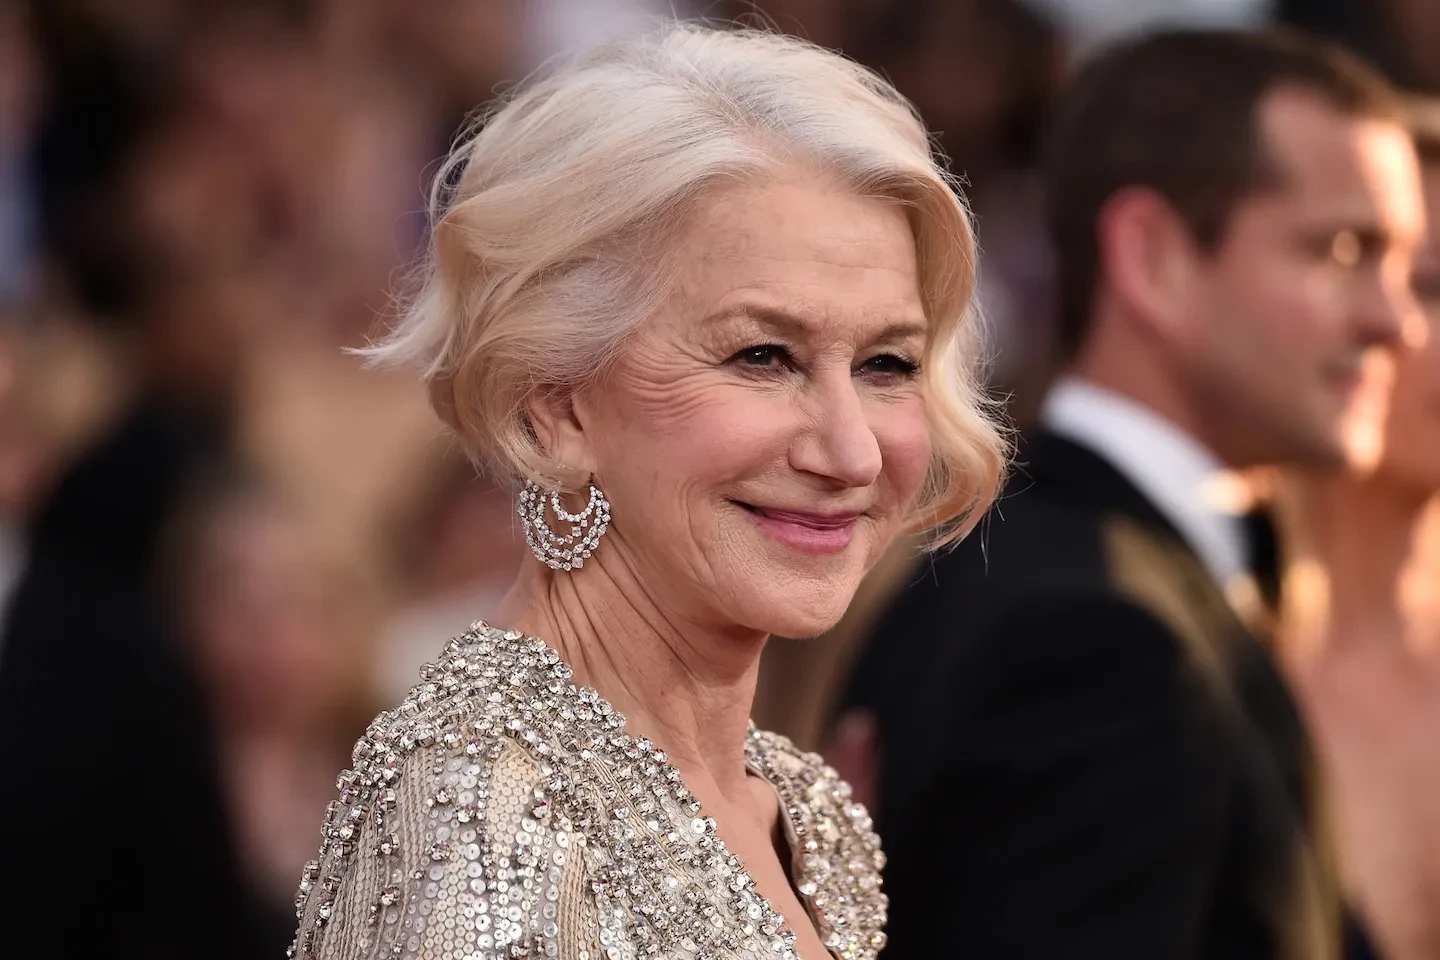 Helen Mirren begged for her role in Fast & Furious